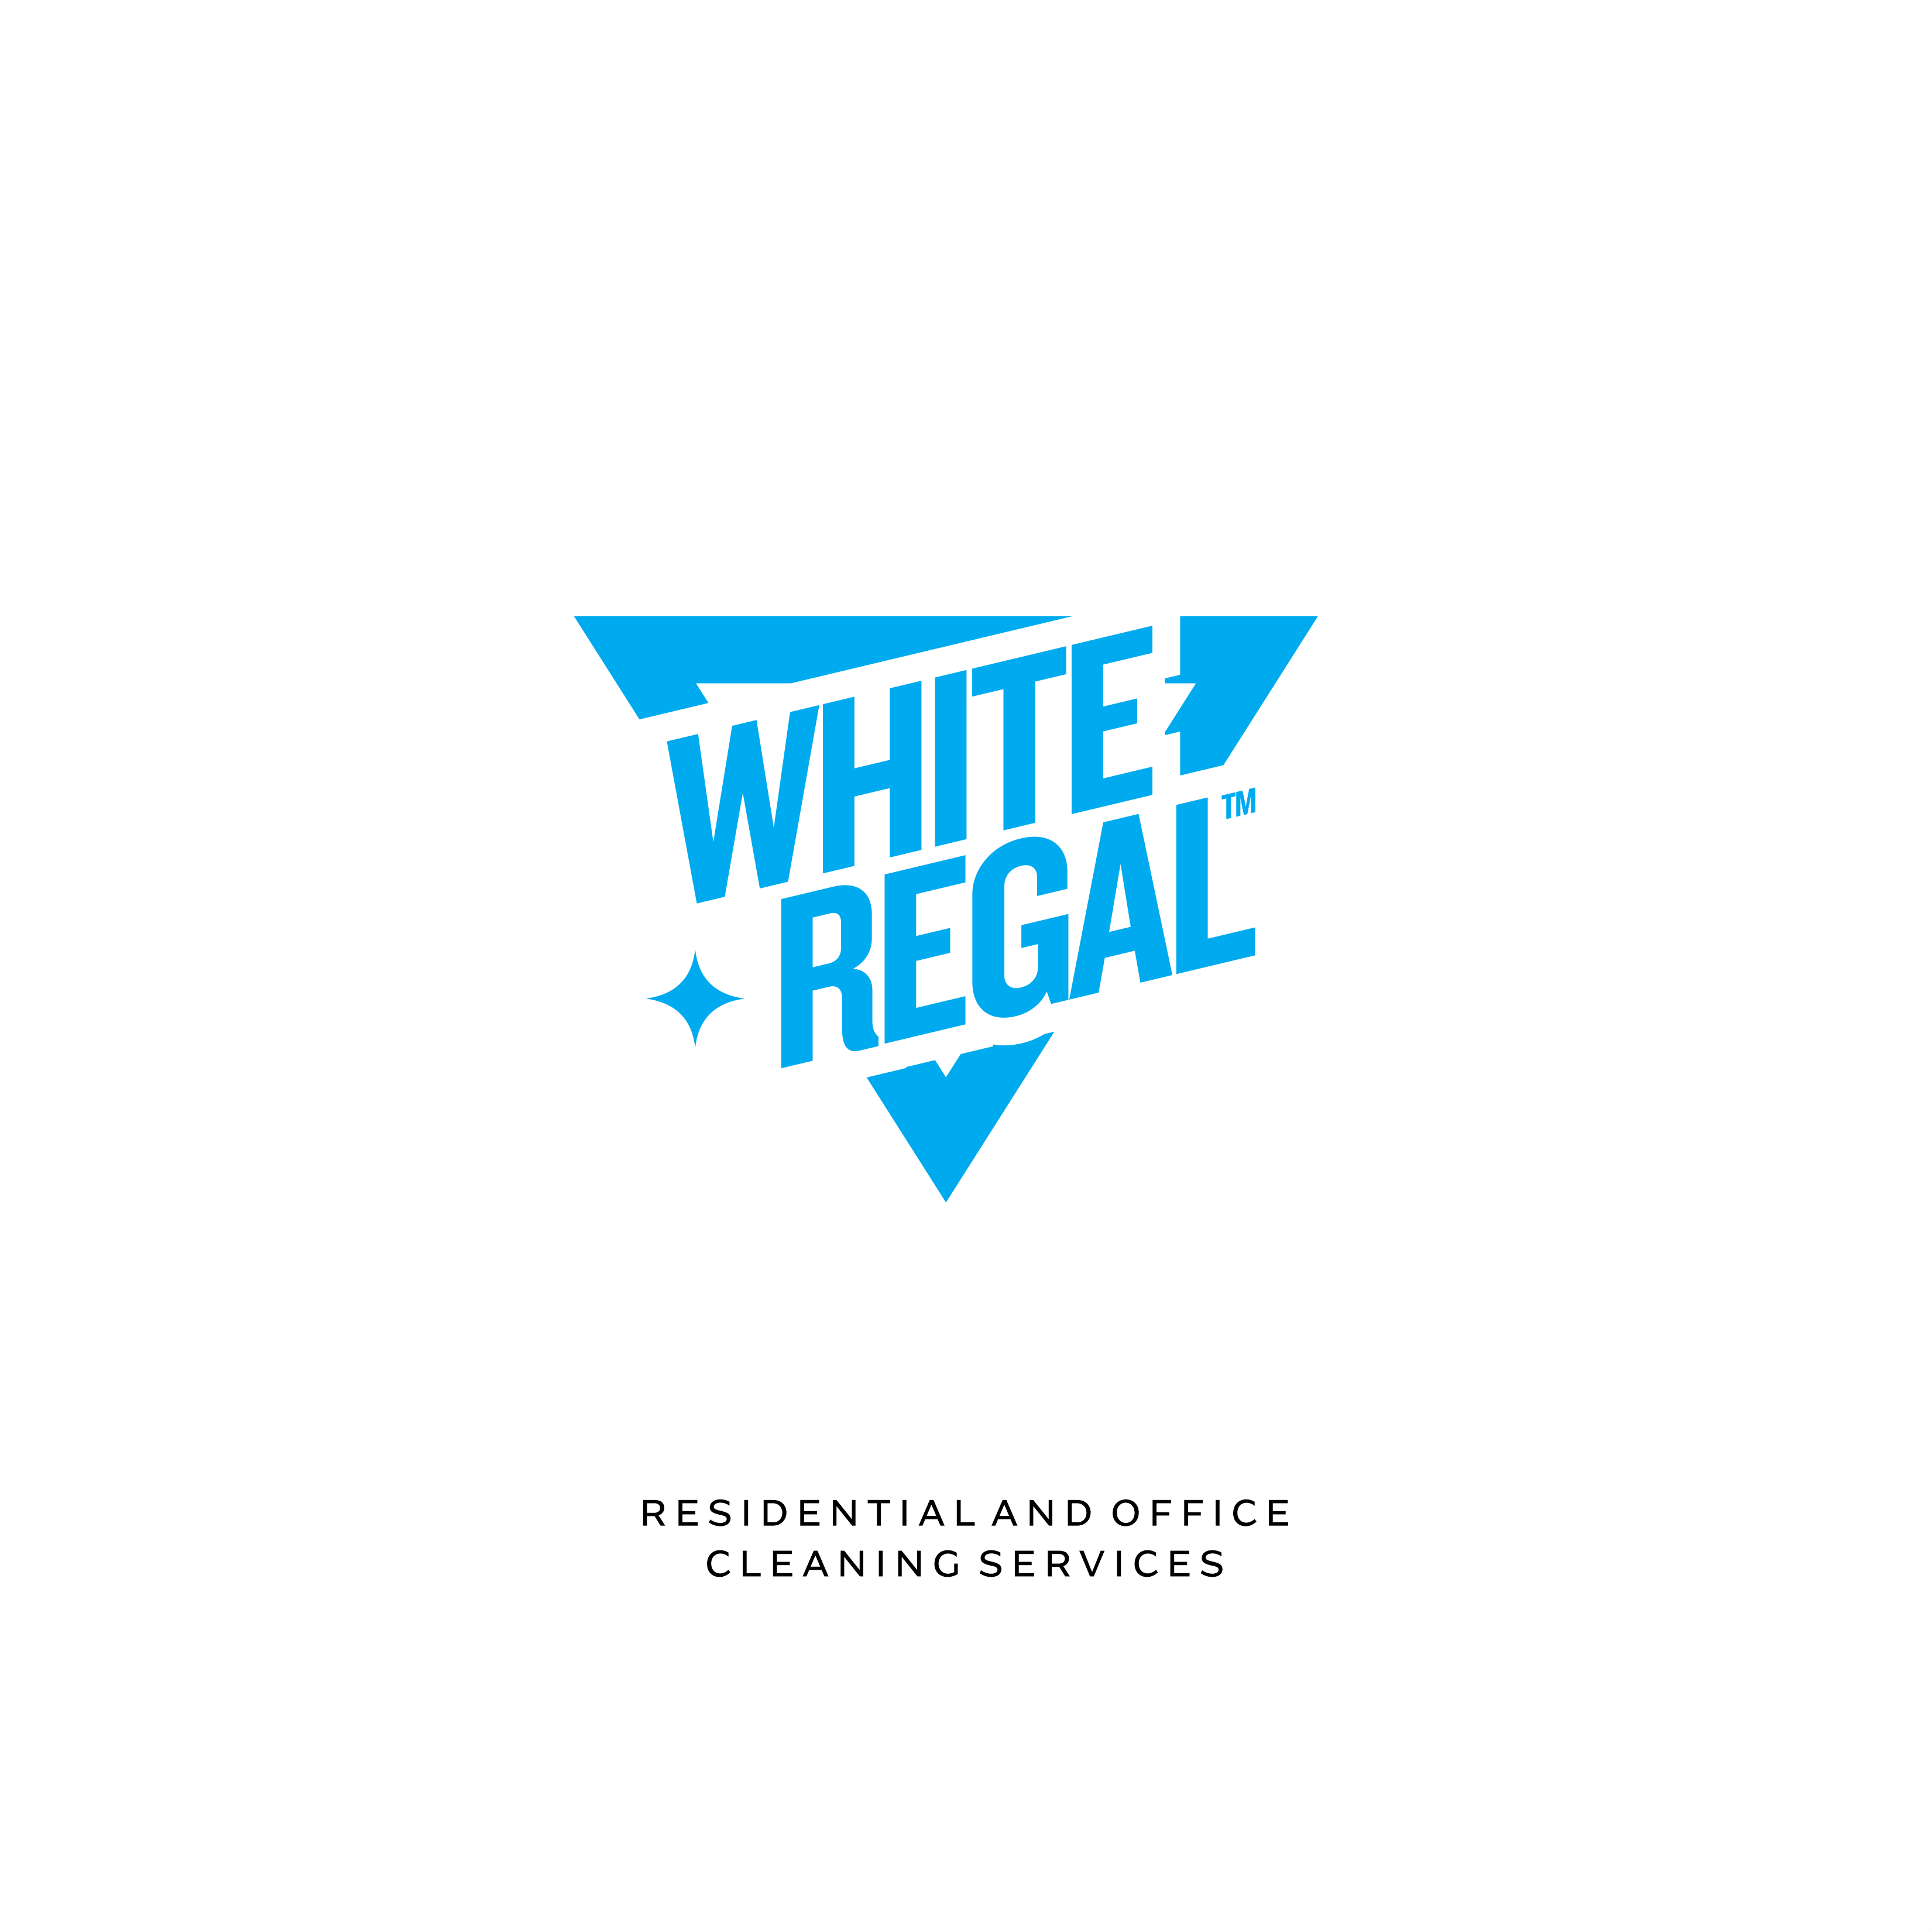 White regal limited